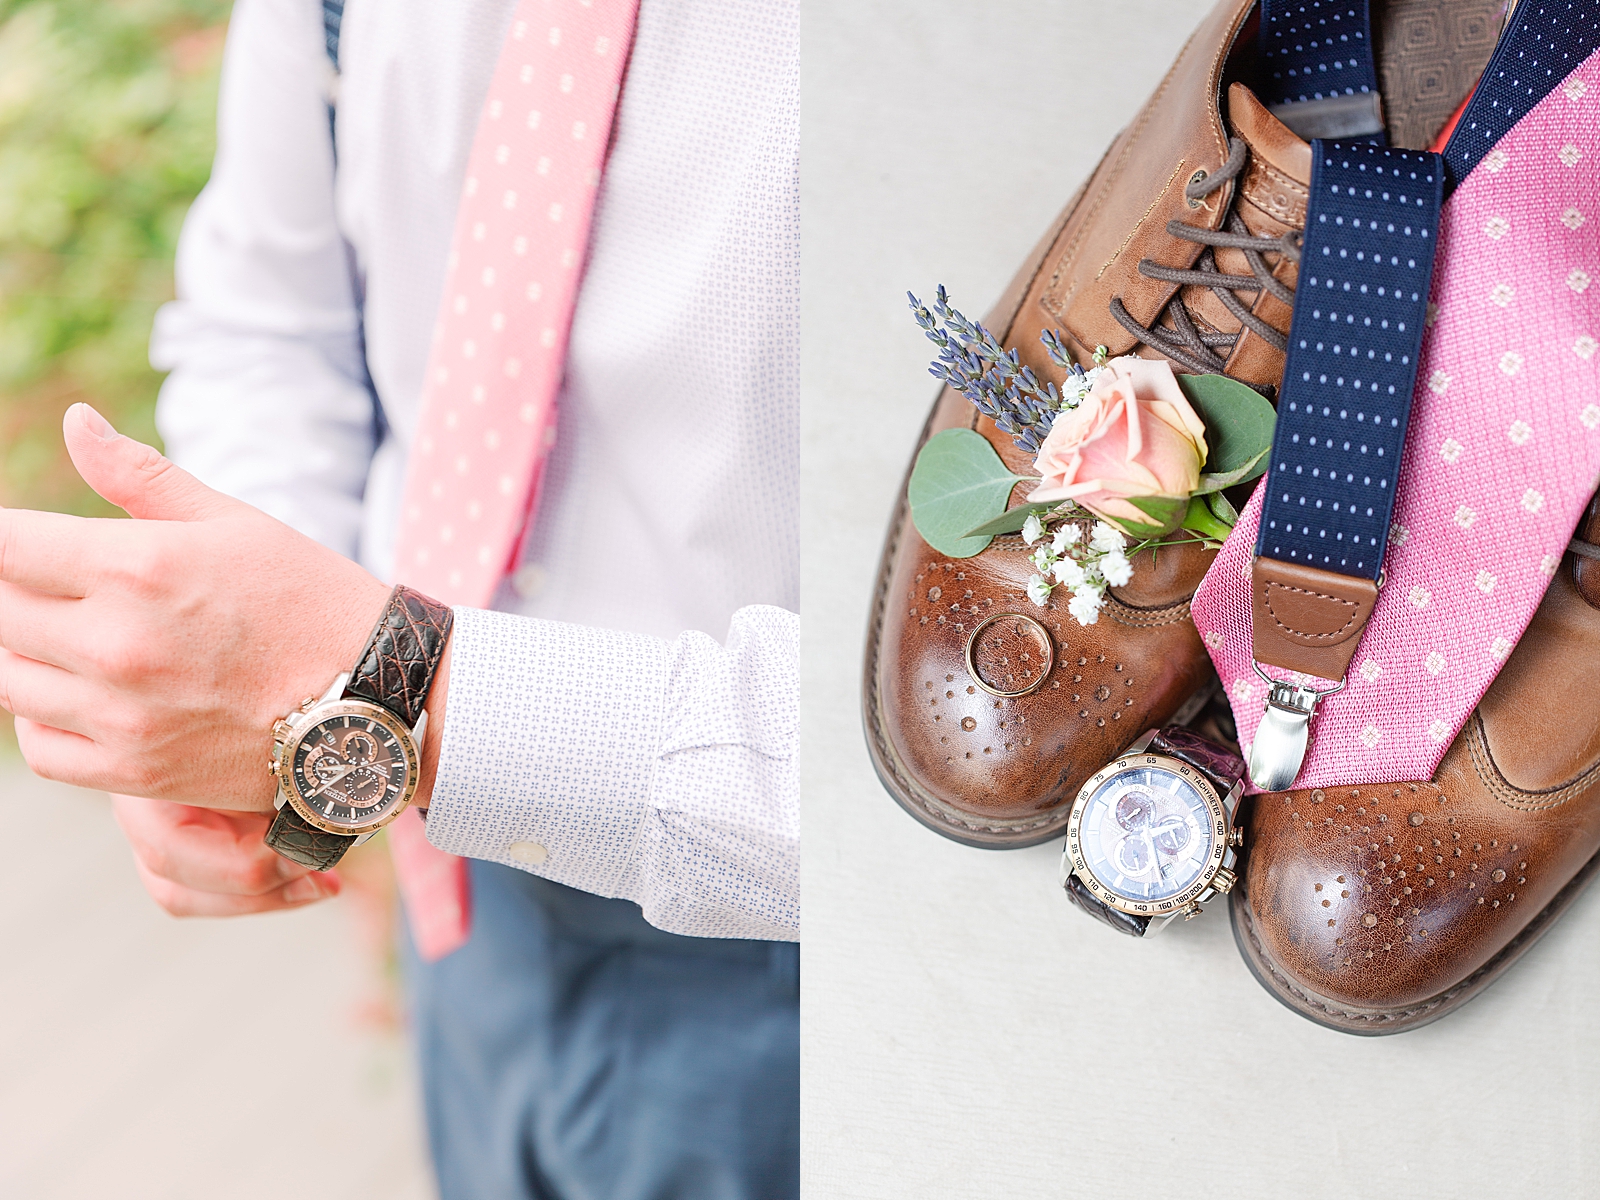 Spring Hawkesdene Wedding Groom putting on watch and grooms shoes tie ring and watch details Photos